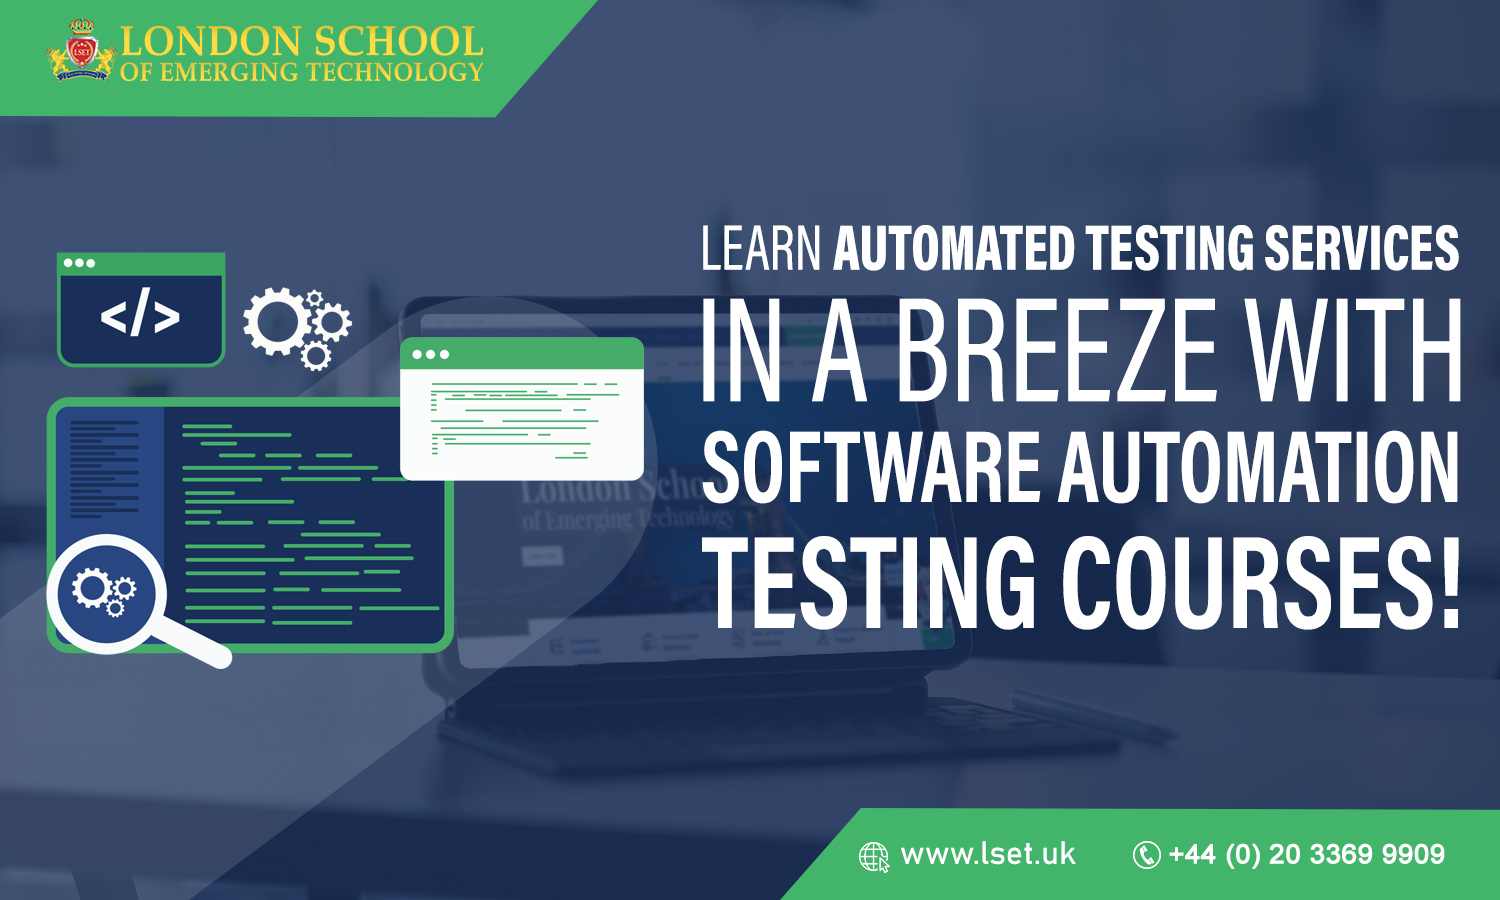 Learn Automated Testing Services in a Breeze with Software Automation Testing Courses!